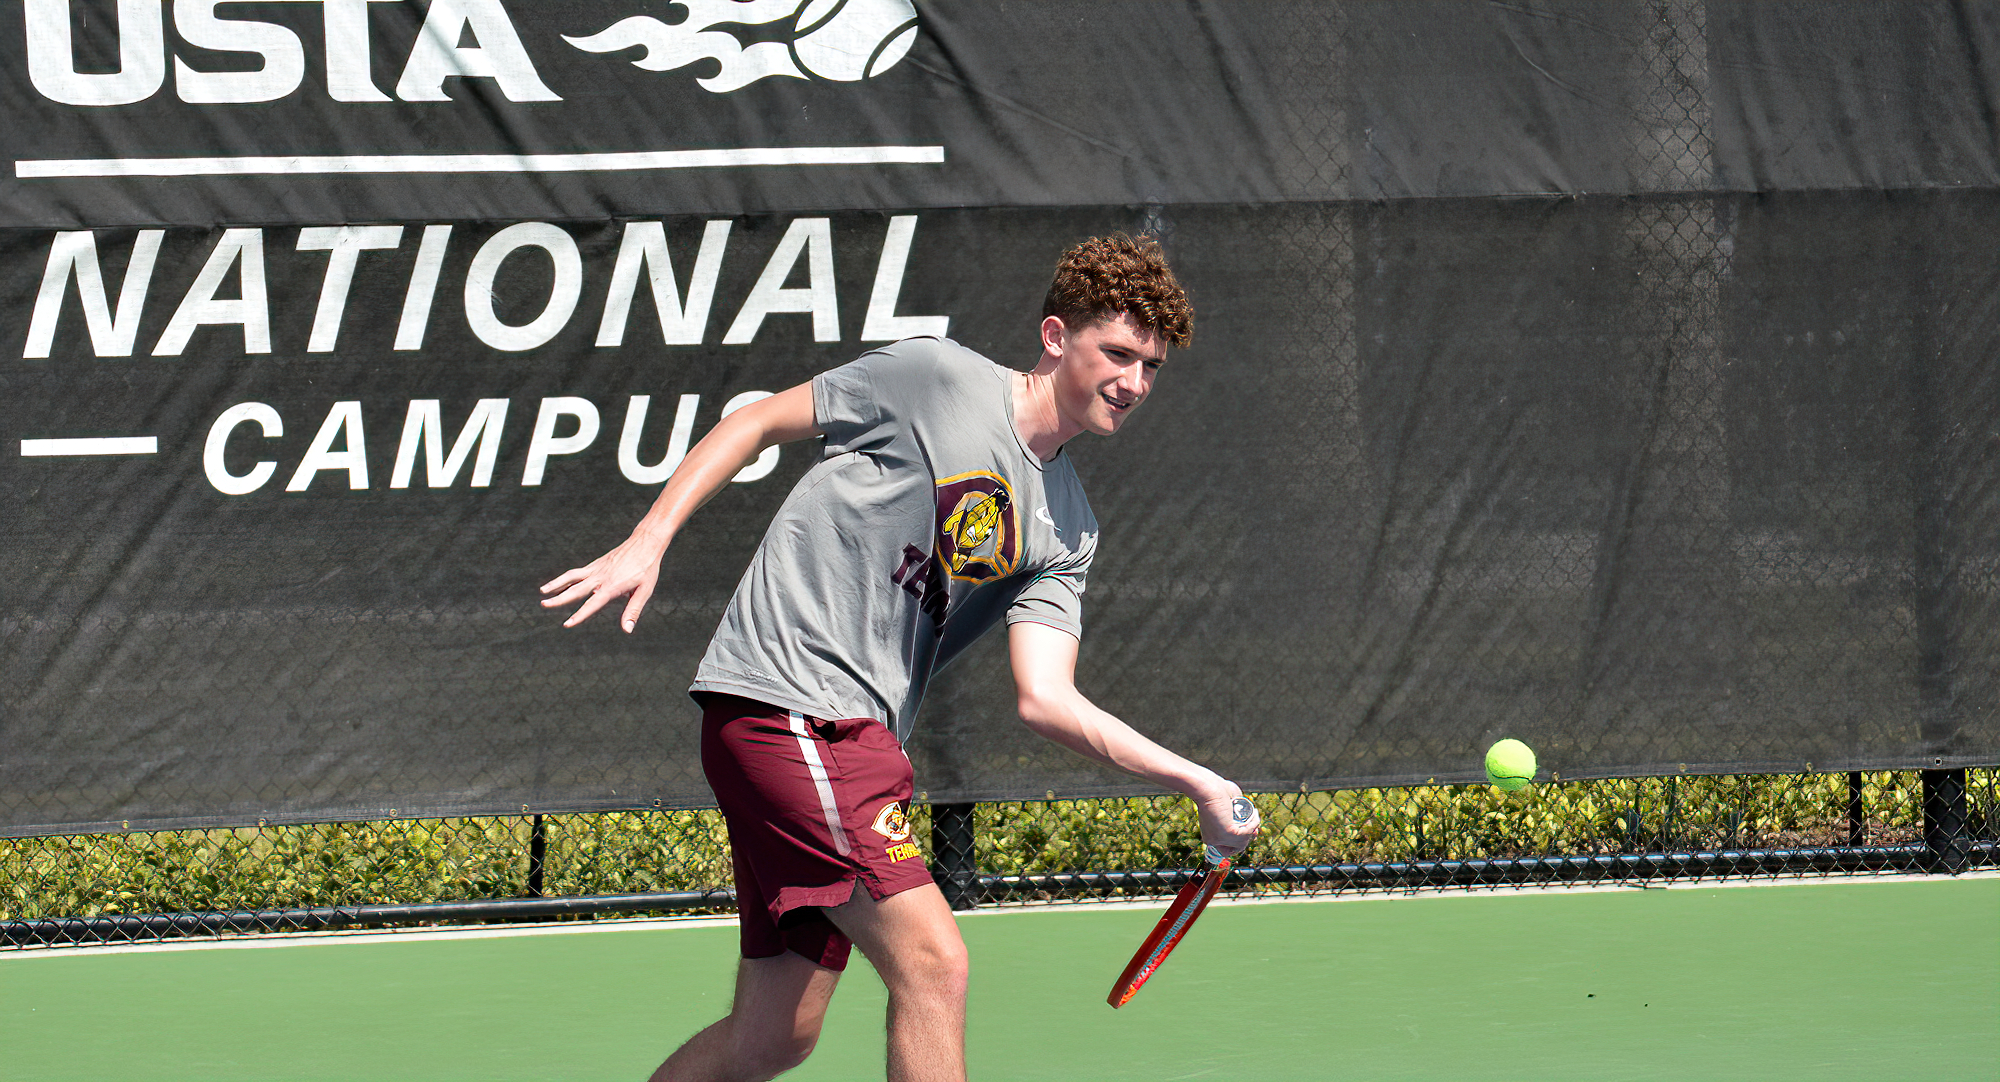 Junior Eli Simonson teamed with Jake Peters to win both of their doubles matches on Day 2 in Florida.